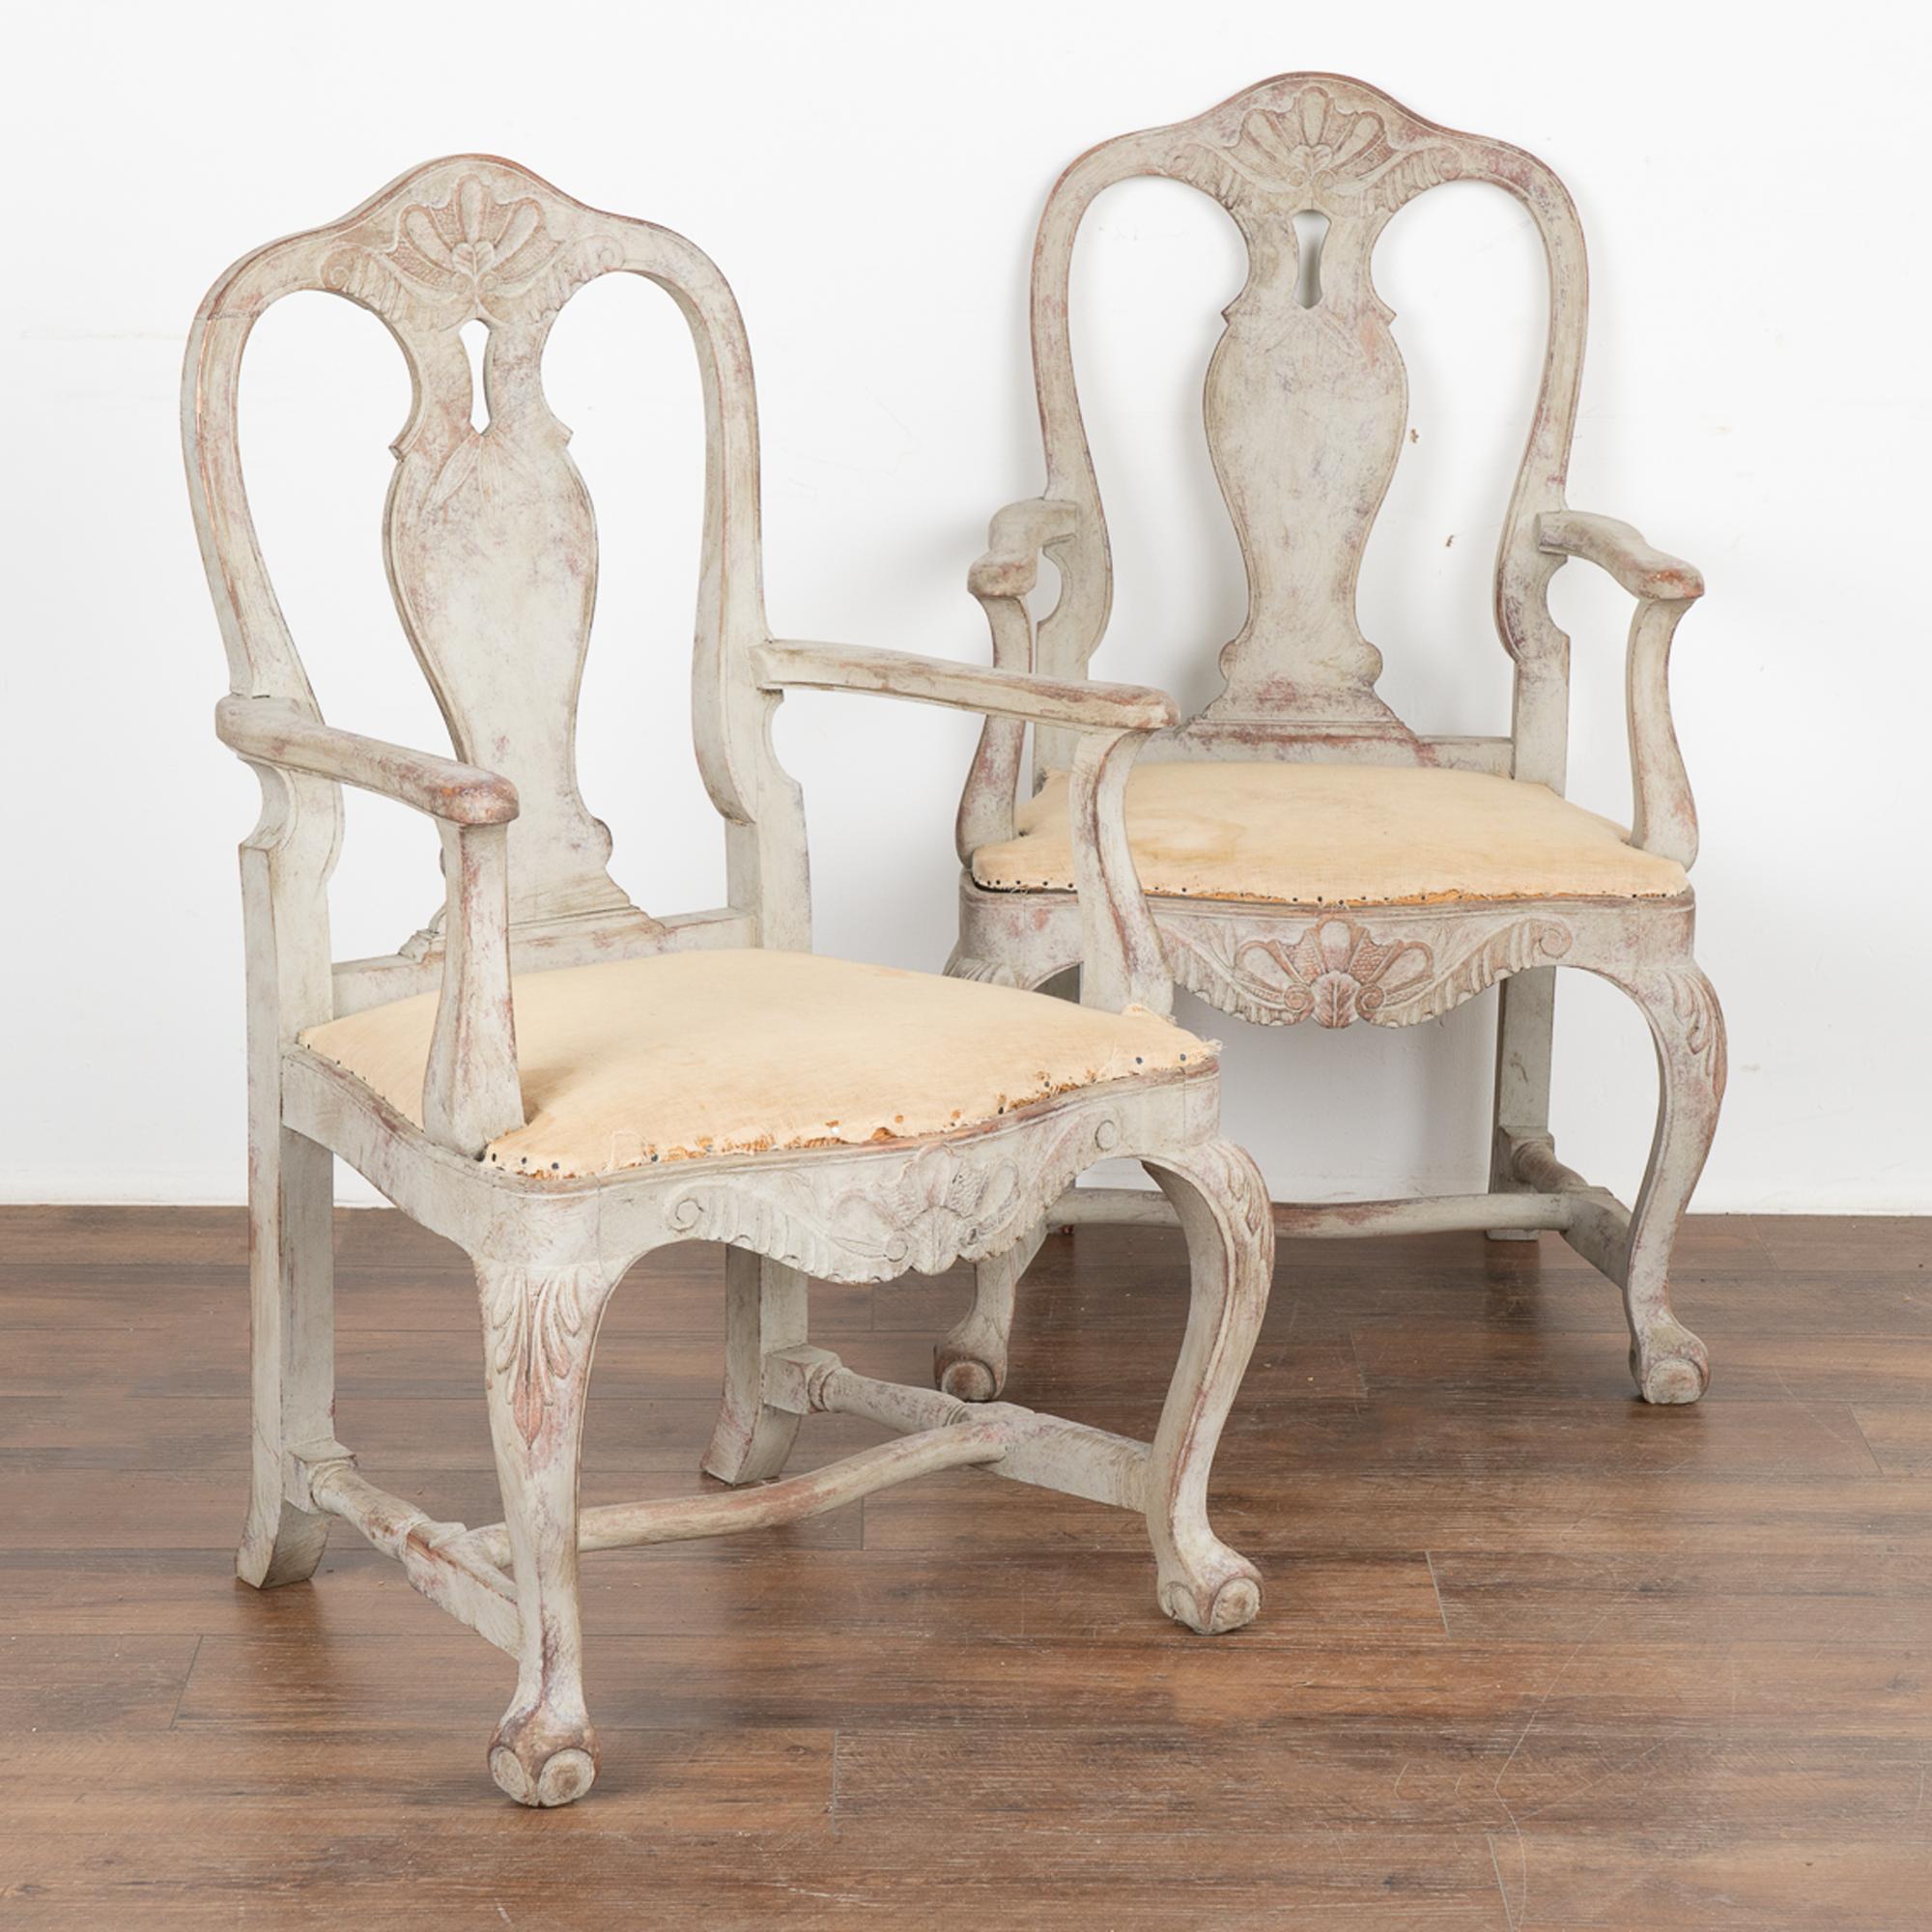 This graceful pair of Swedish Gustavian arm chairs have a wonderfully warm patina thanks to the lovely finish.
These armchairs have been given a newer, professionally painted gray layered finish which is lightly scraped creating a soft contrast